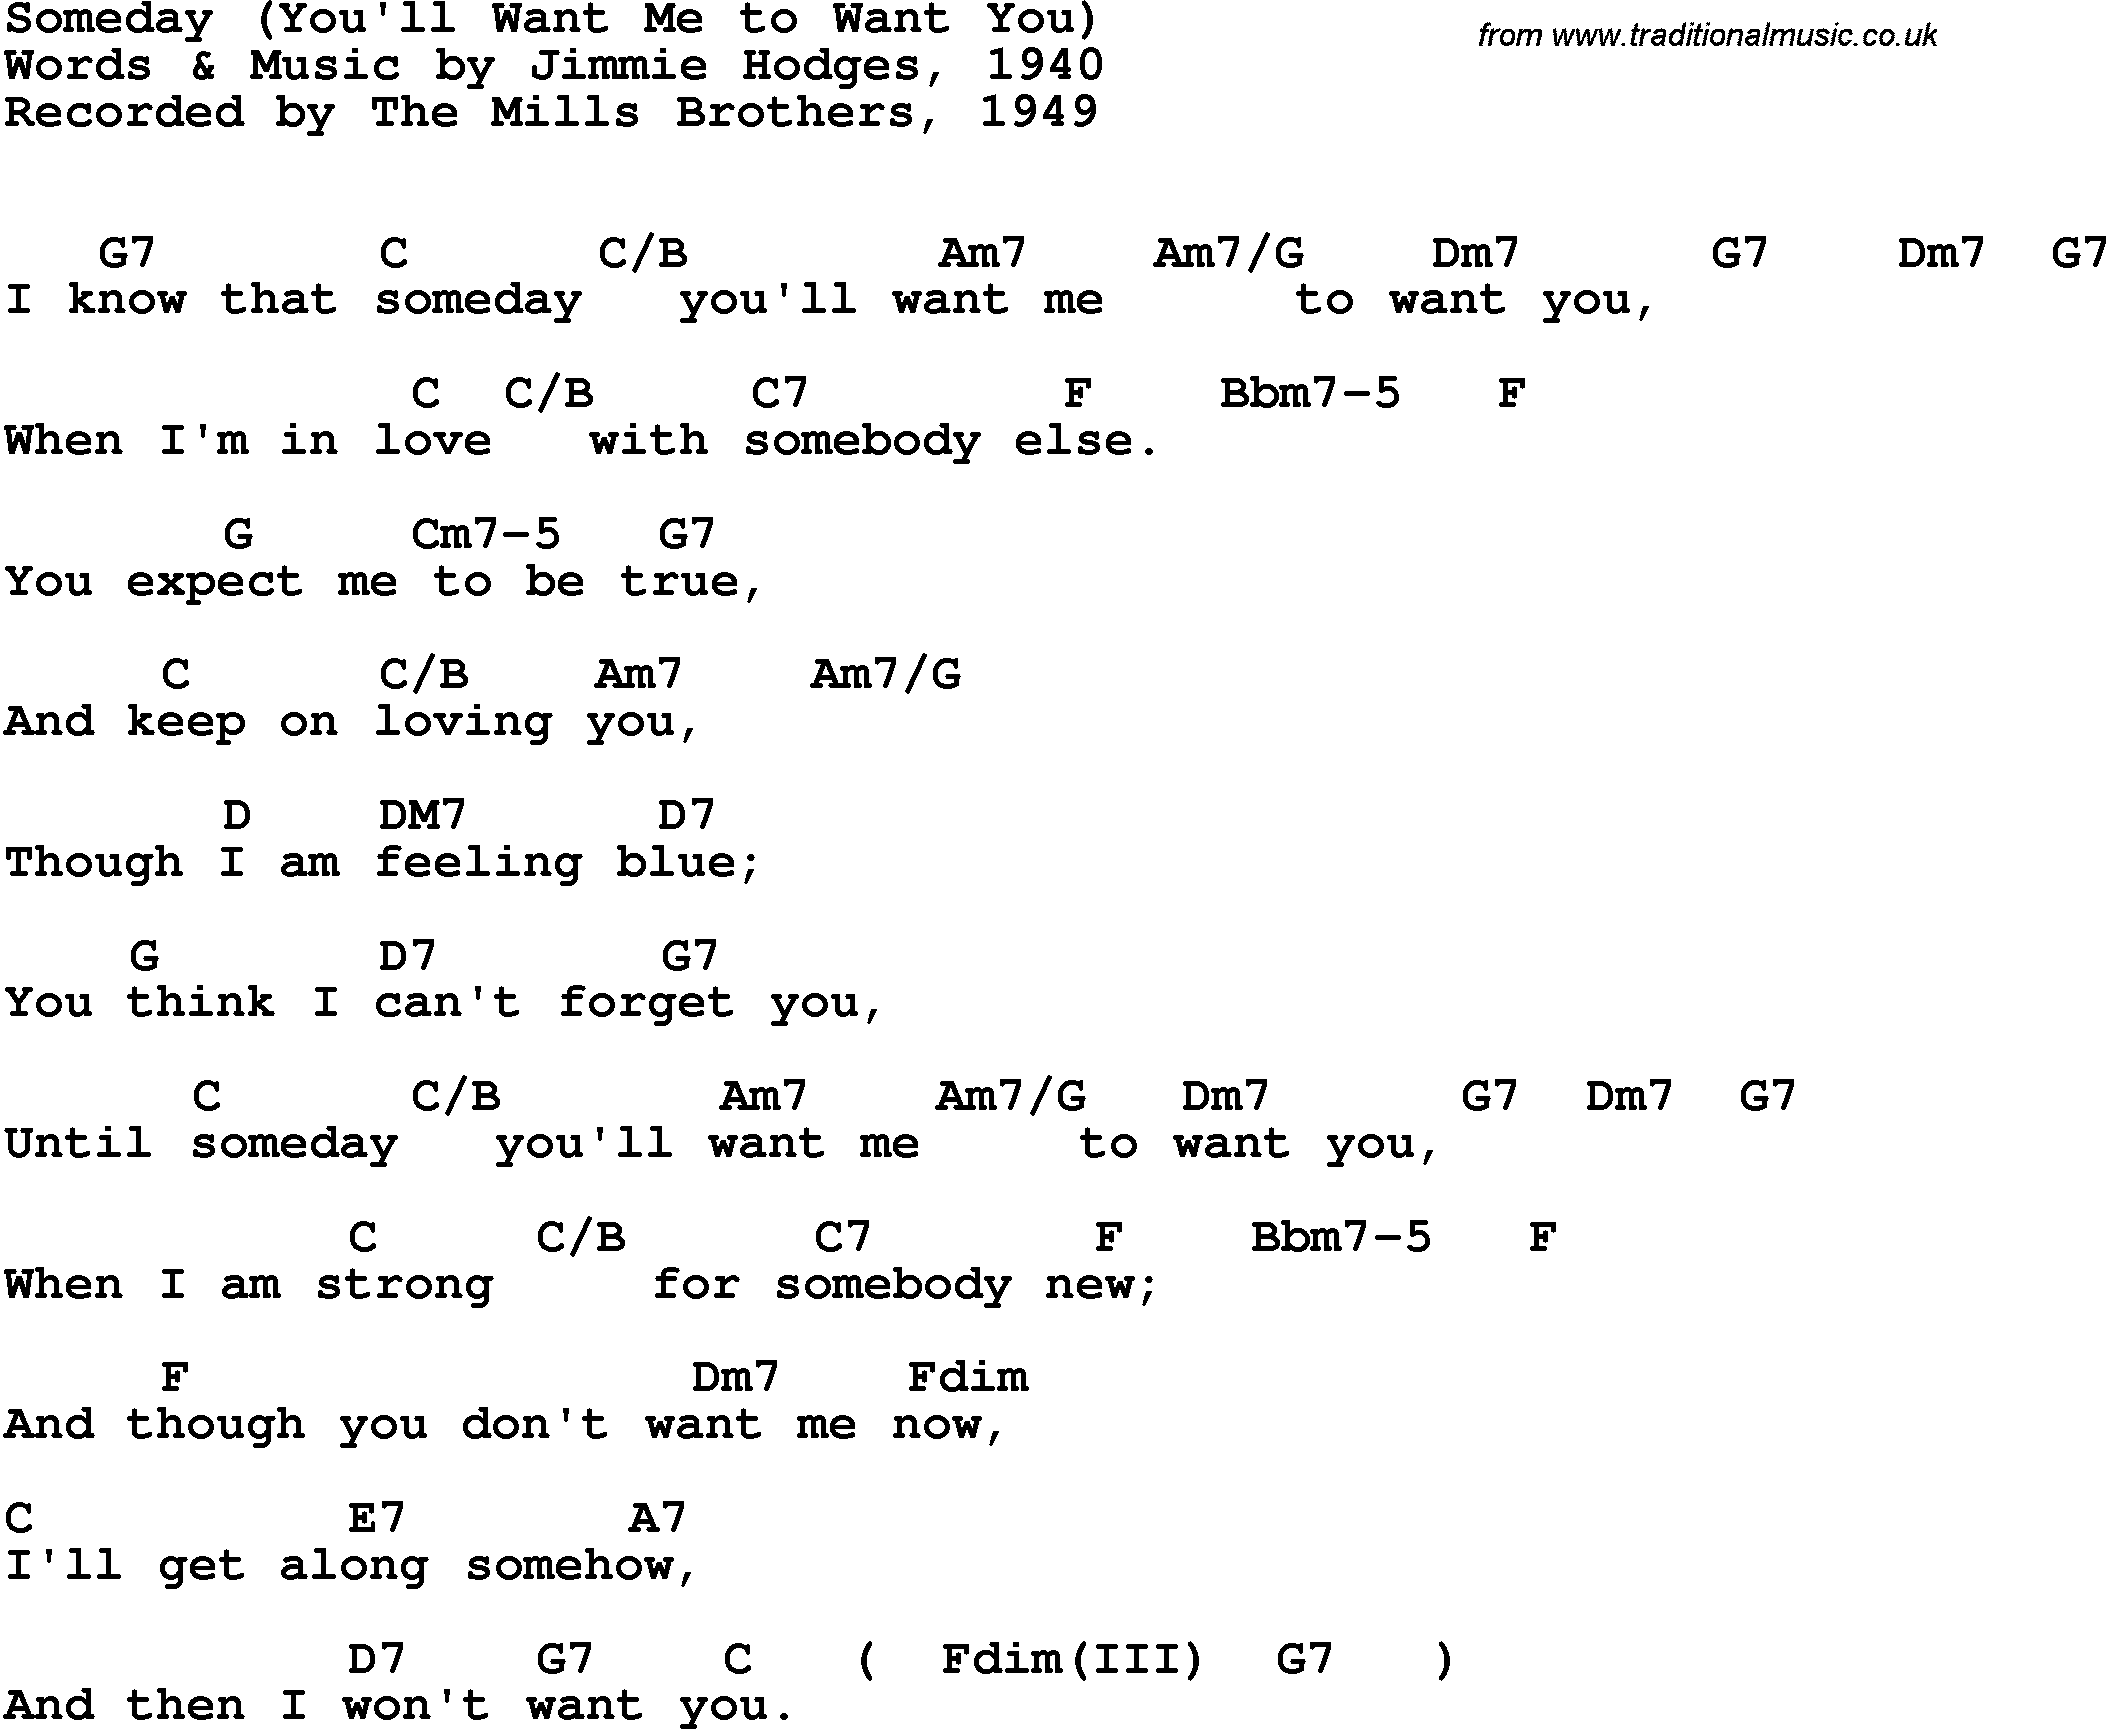 Song Lyrics with guitar chords for Someday (You'll Want Me To Want You) - The Mills Brothers, 1949